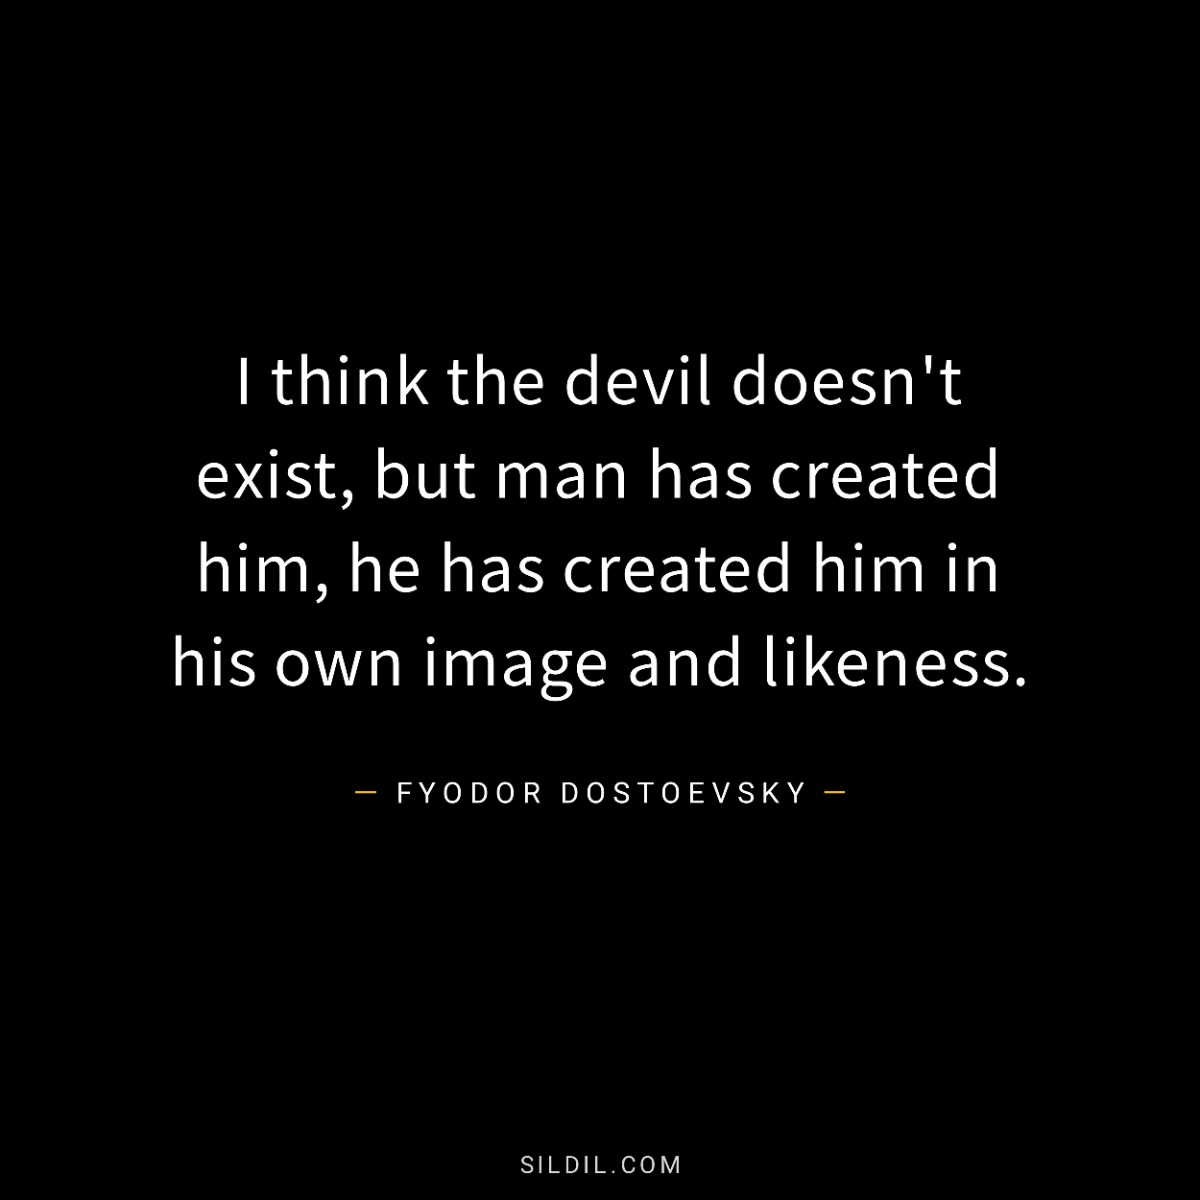 I think the devil doesn't exist, but man has created him, he has created him in his own image and likeness.